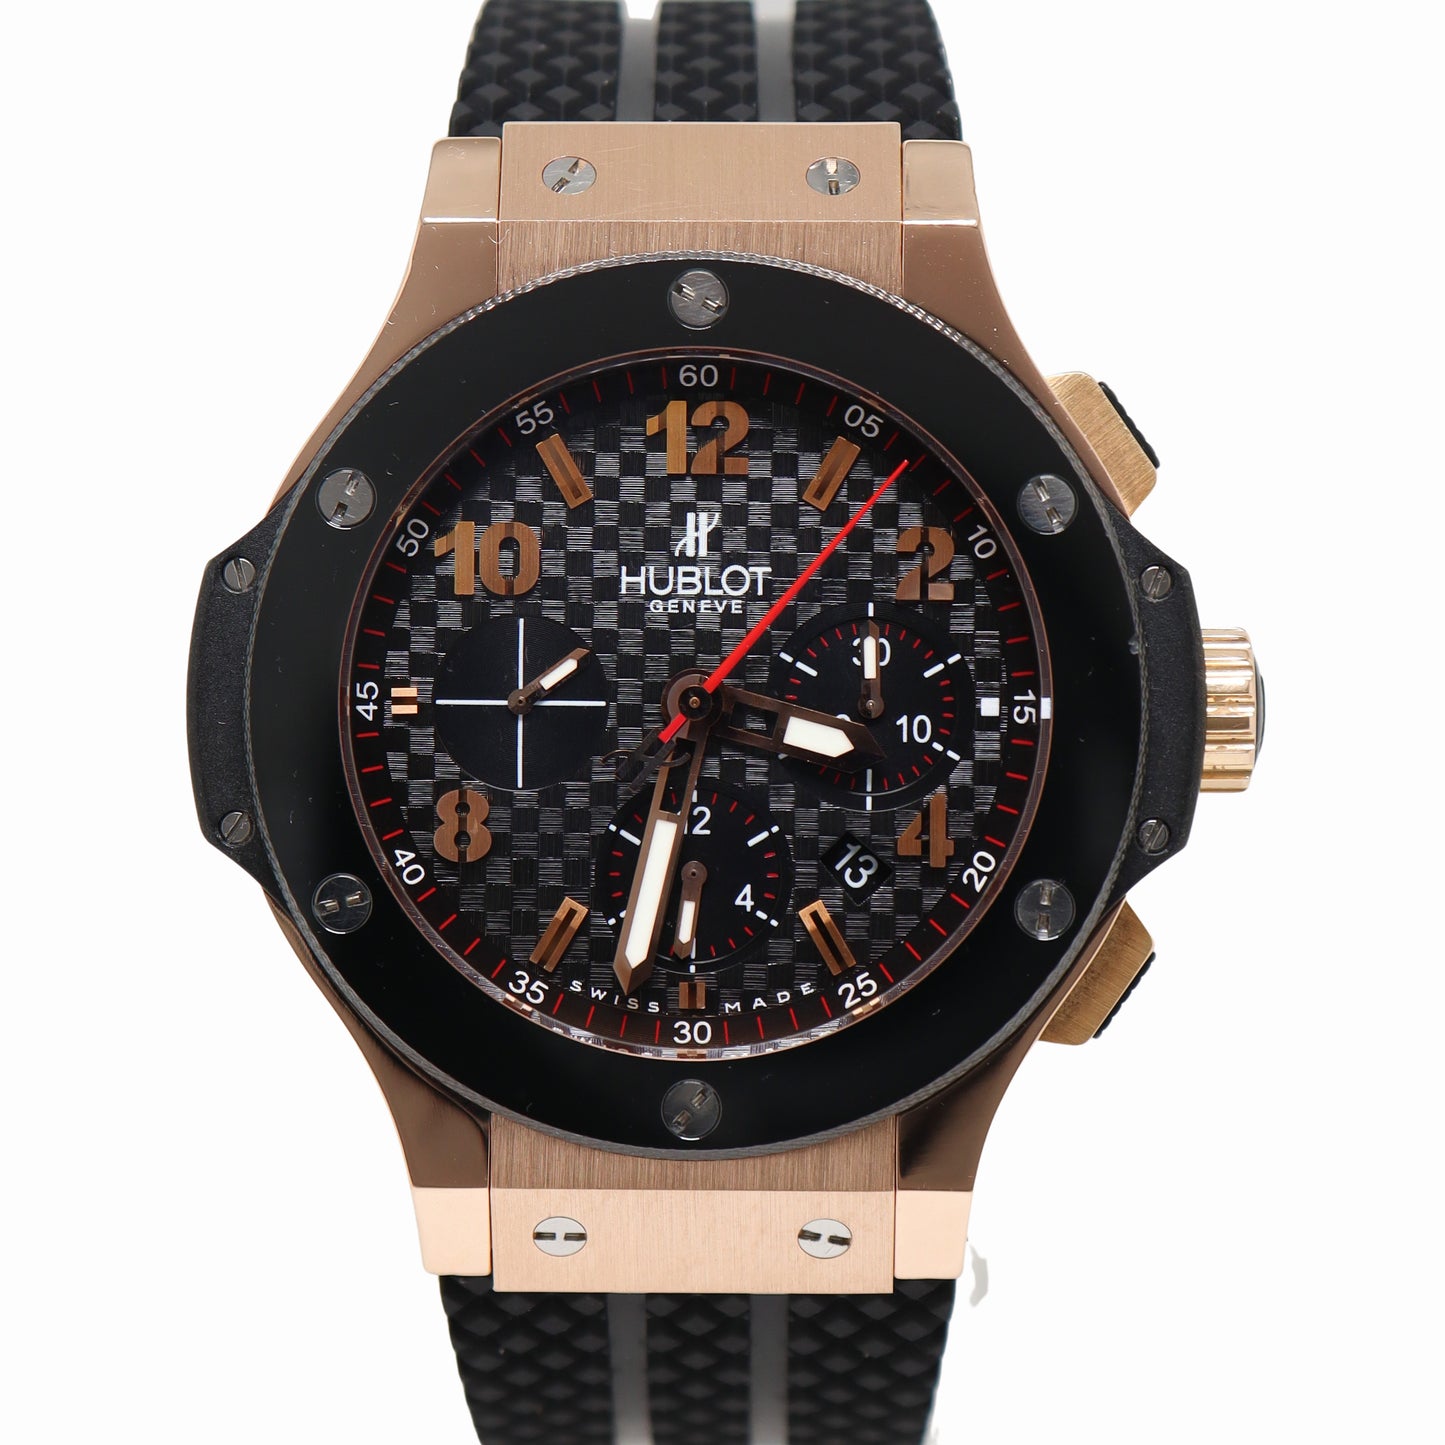 Hublot Big Bang Rose Gold 44mm Black Chronograph Dial Watch Reference# 301.PB.131.RX - Happy Jewelers Fine Jewelry Lifetime Warranty